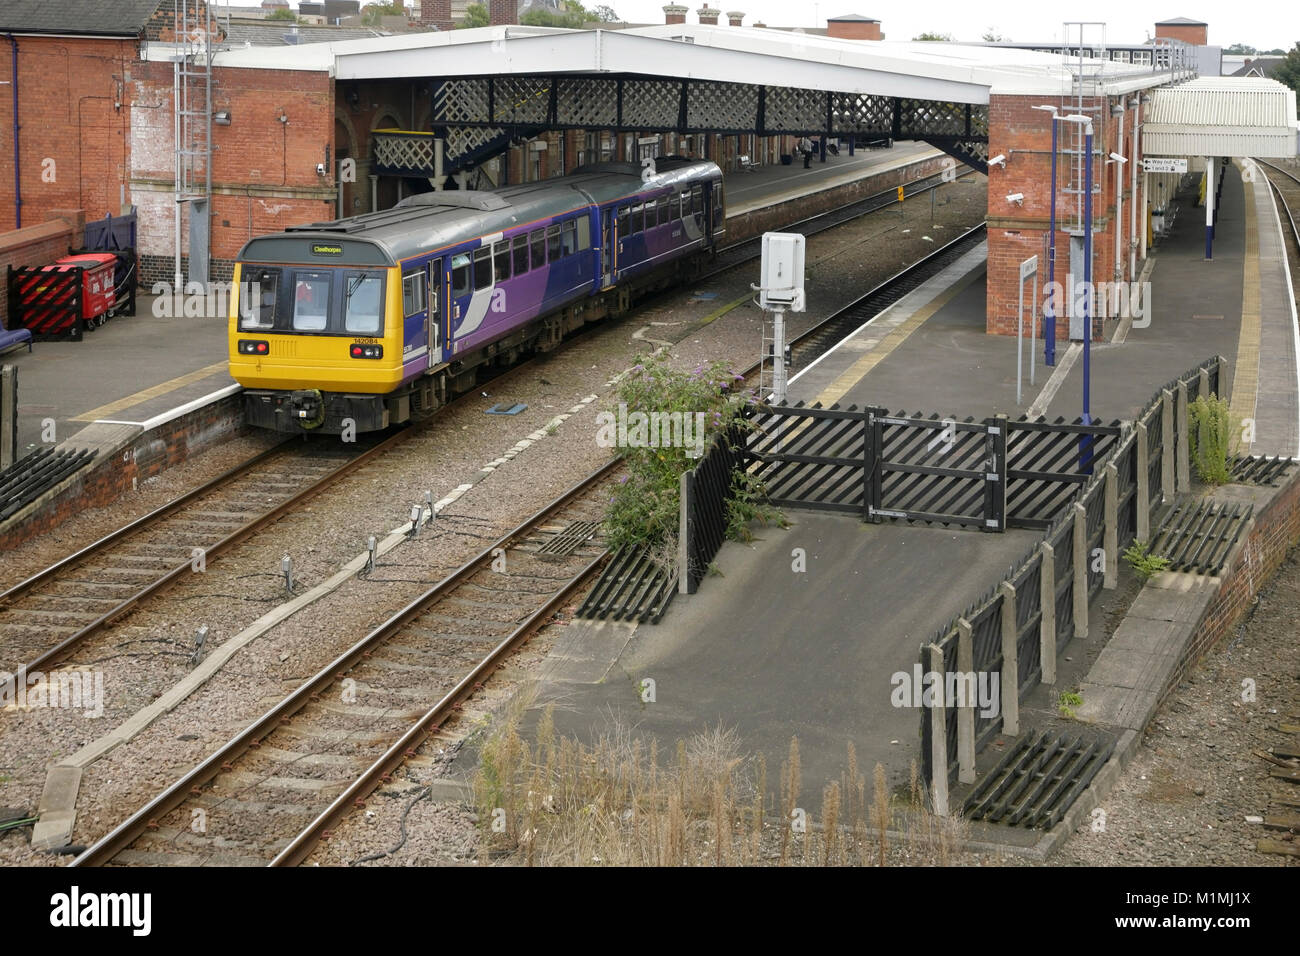 Northern Rail class 142 diesel multiple unit arriving at Grimsby Town station, UK. Stock Photo